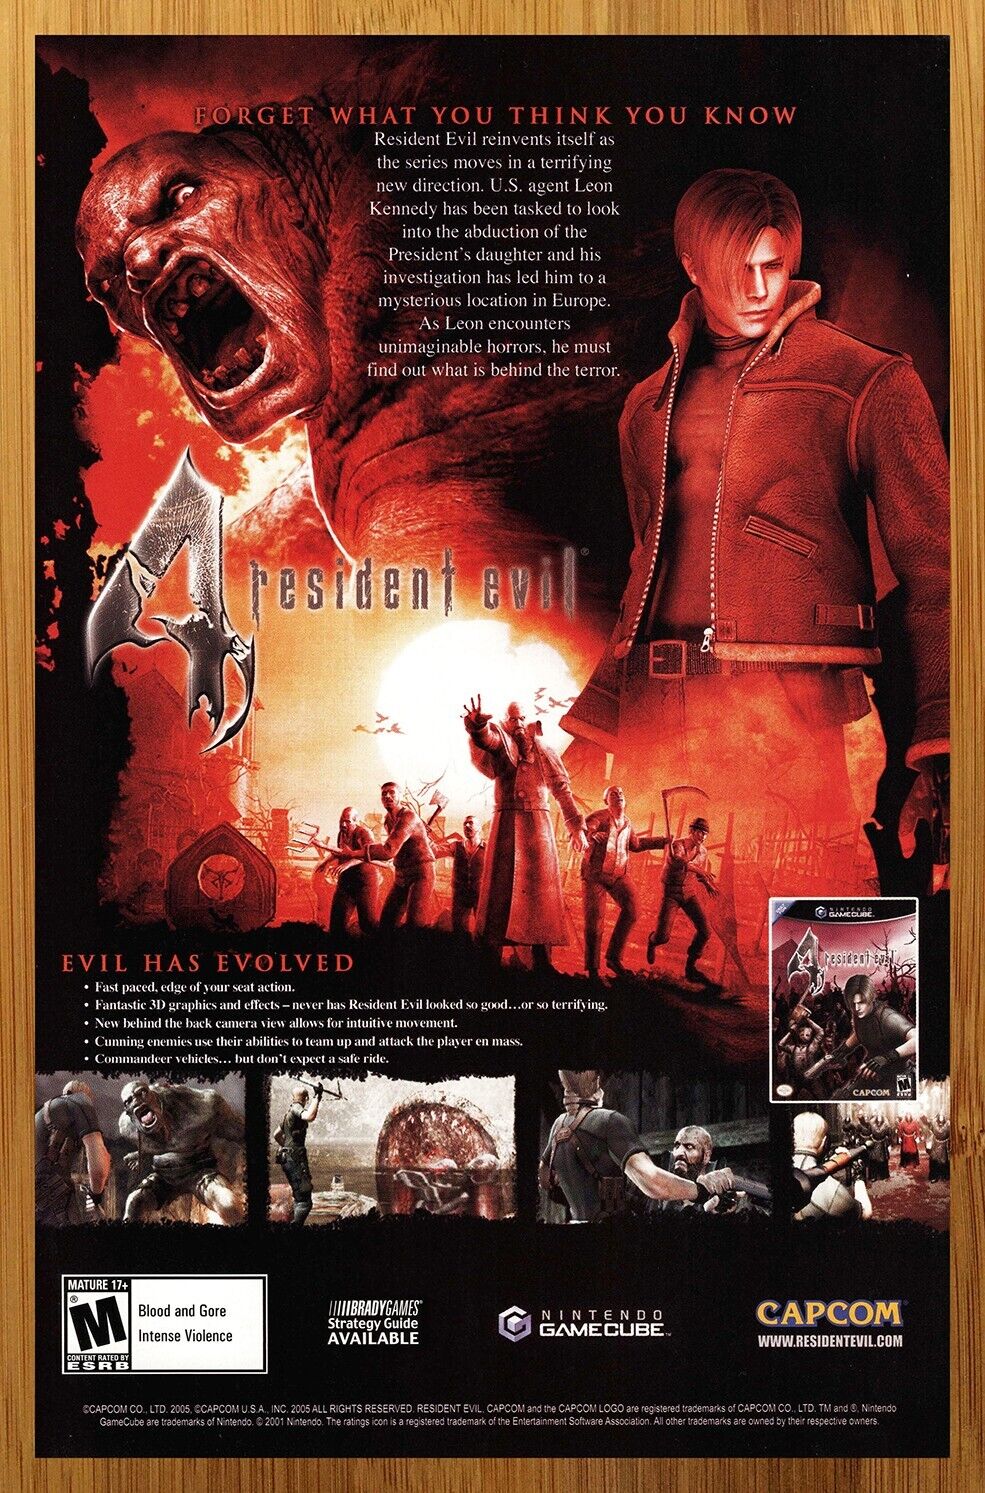 2005 Resident Evil 4 PS2 Gamecube Print Ad/Poster Authentic Official Promo Art